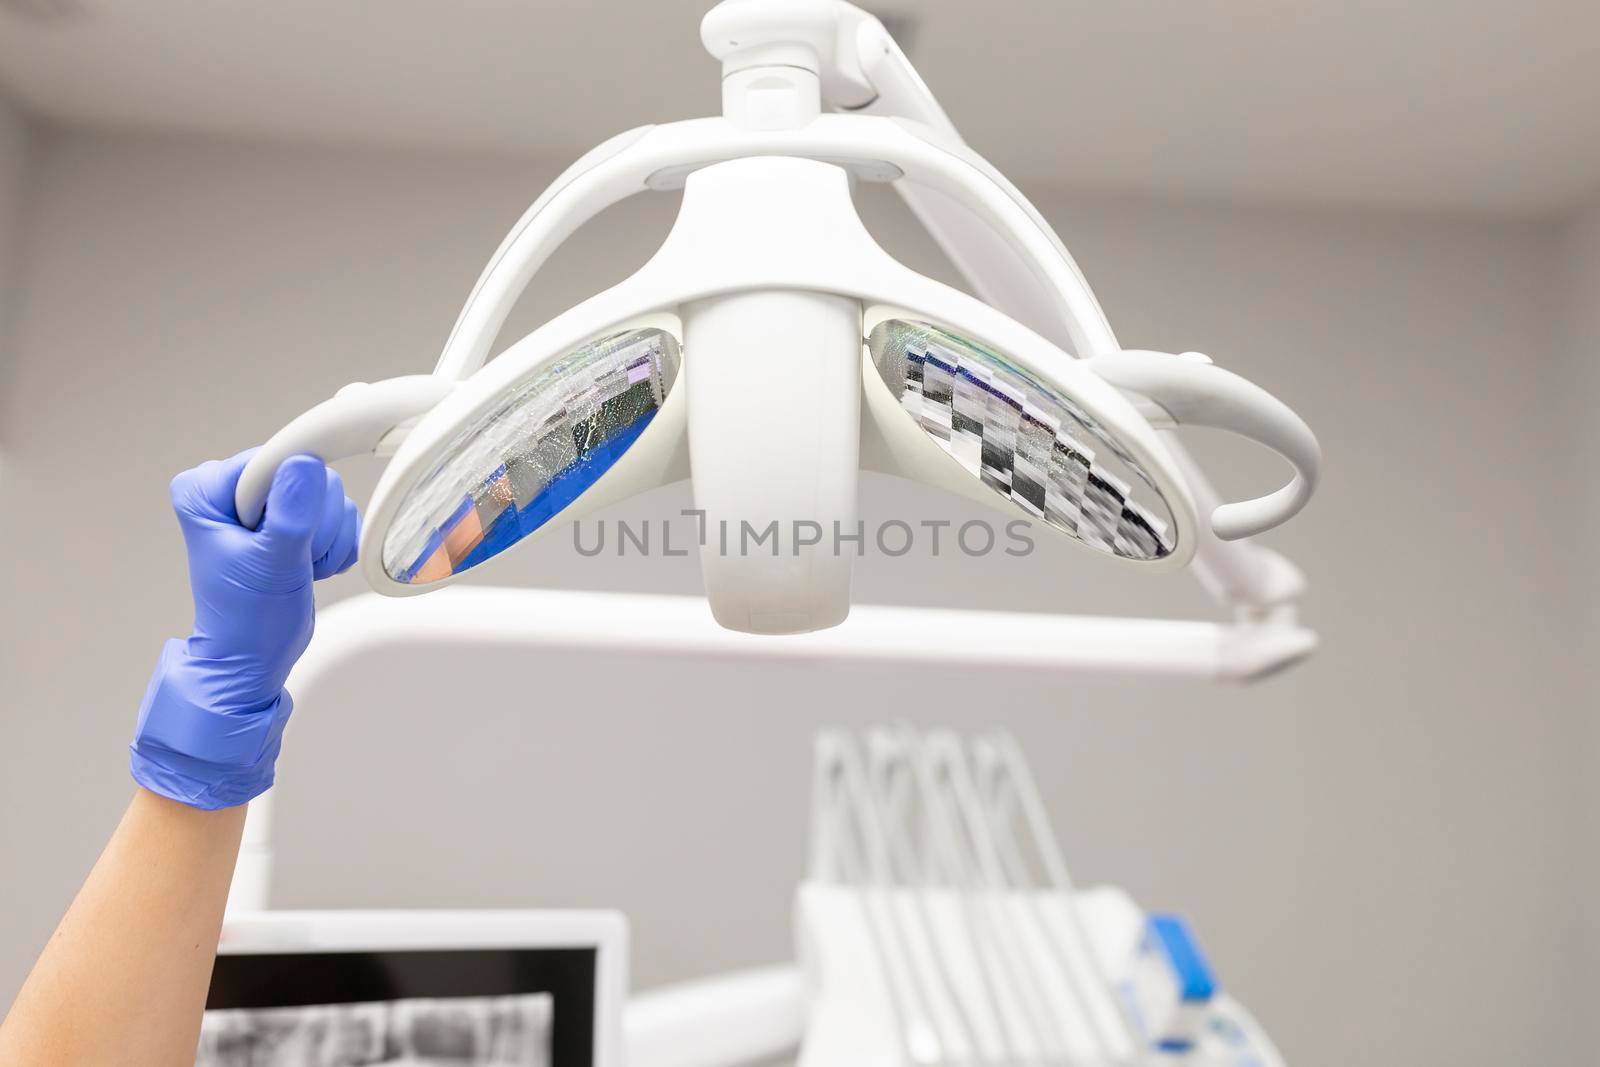 A dentist woman's hand adjusting the dental chair's light in order to properly see the issues regarding her client at the dental clinic